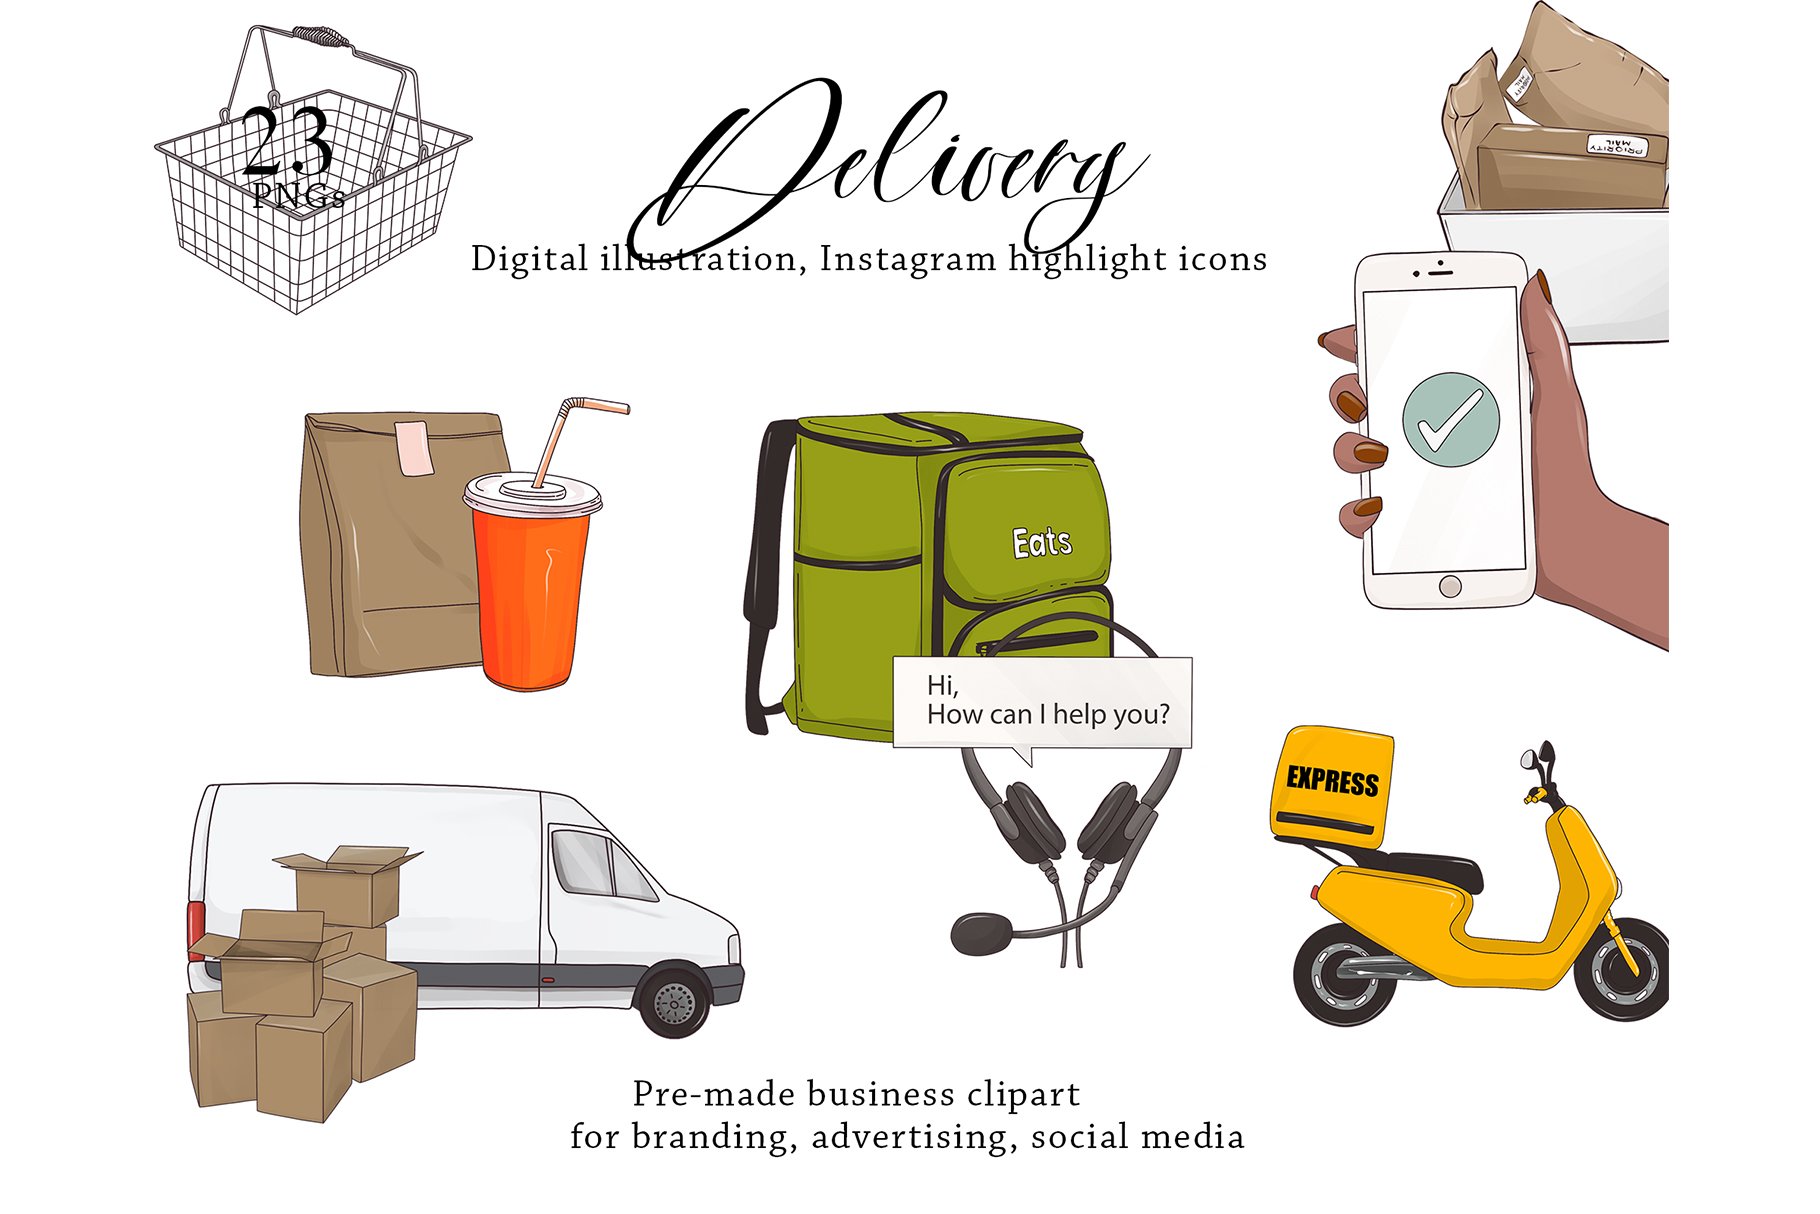 Delivery clipart Mail truck cover image.